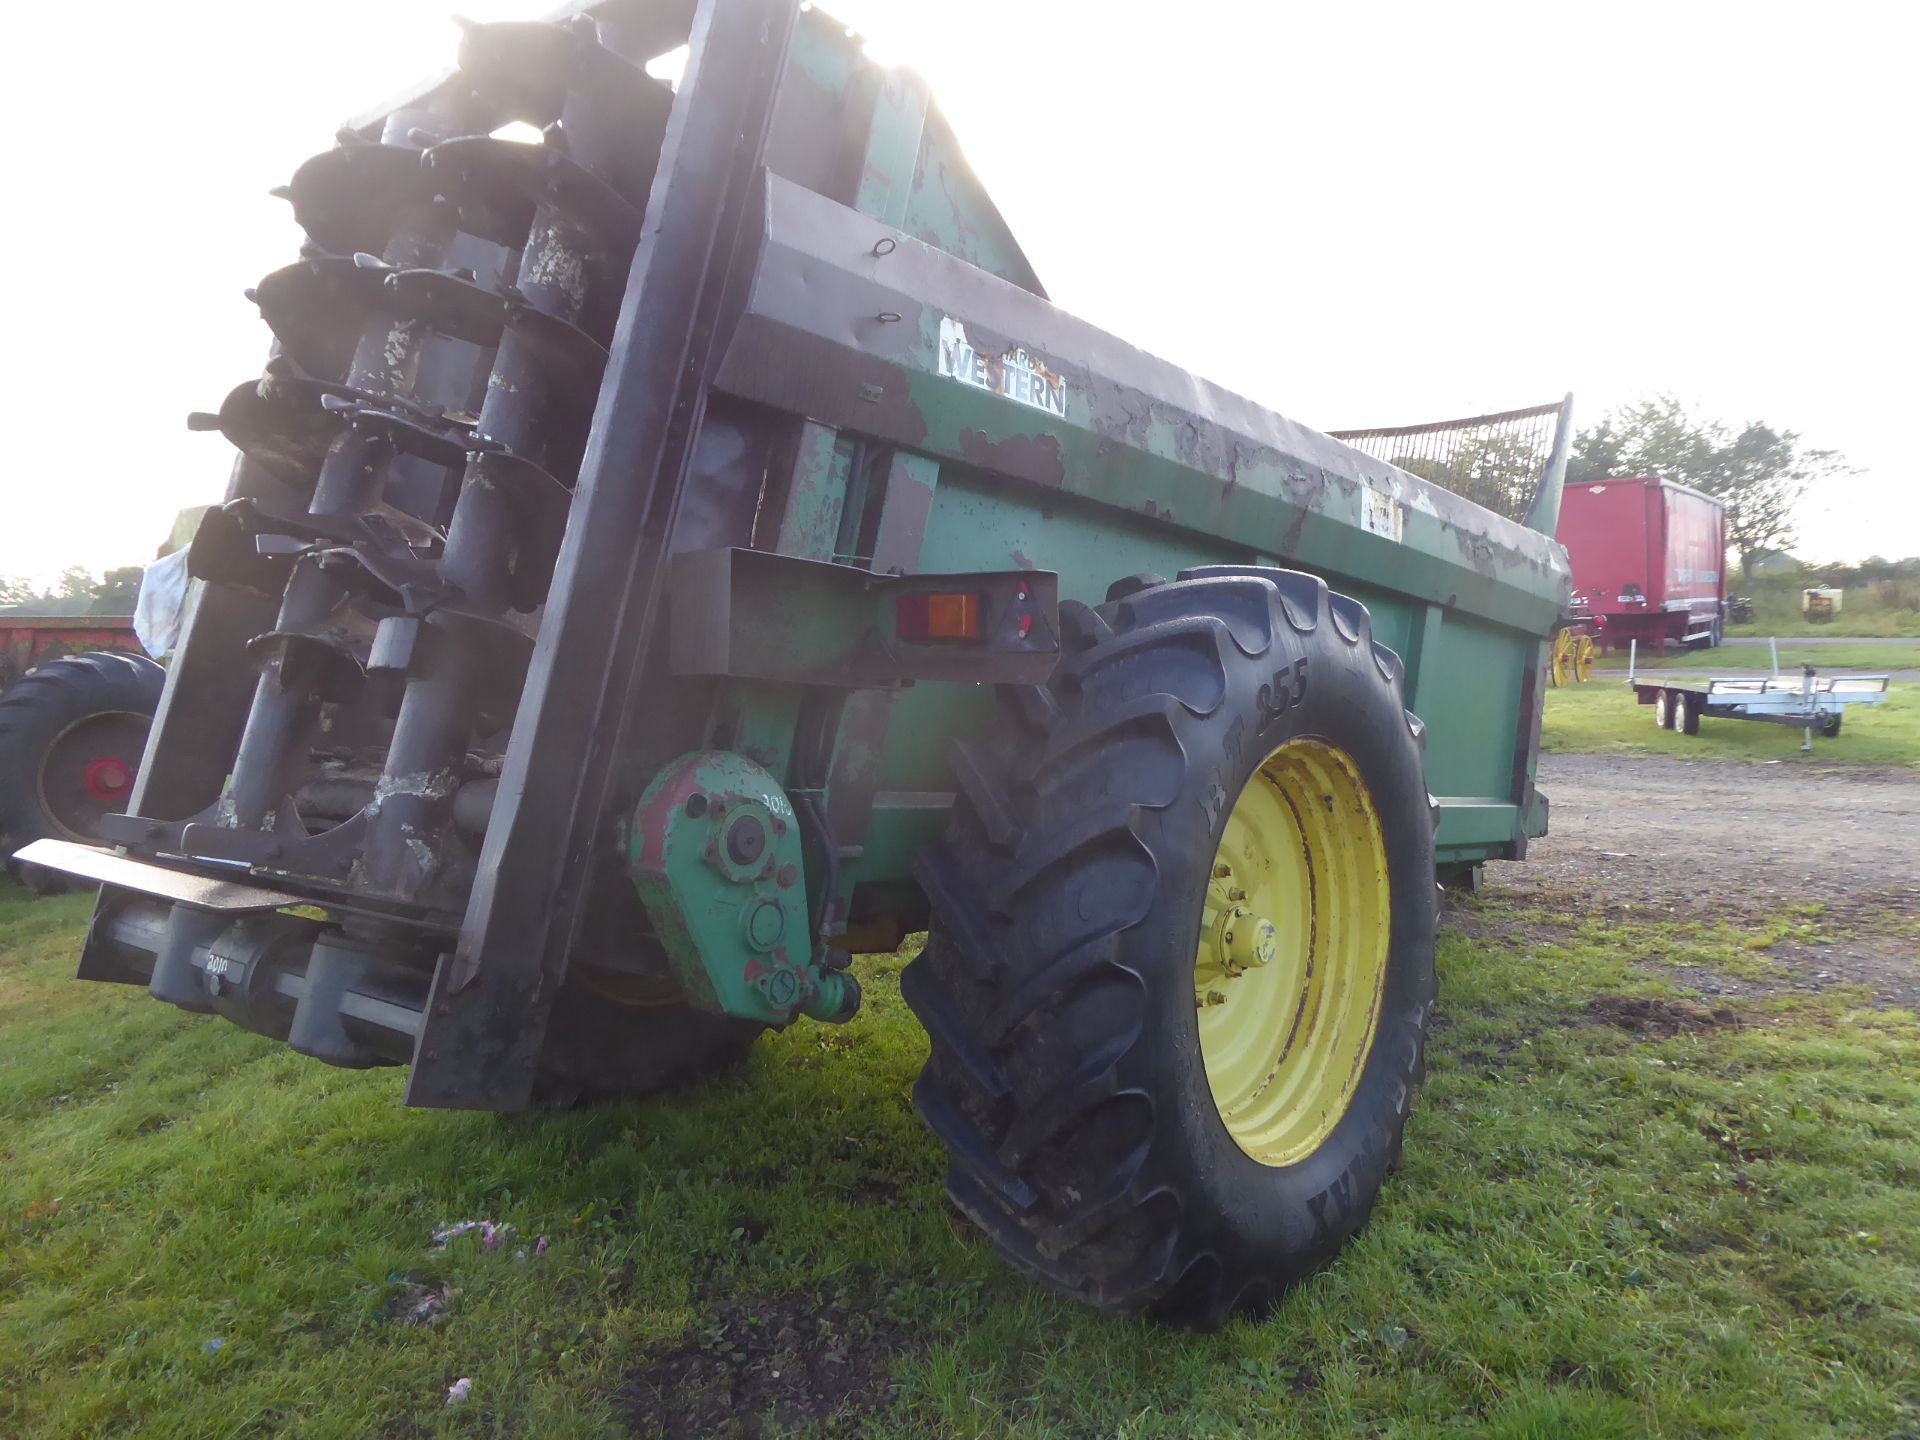 Western 10T muck spreader, wo, 2003 - Image 3 of 3